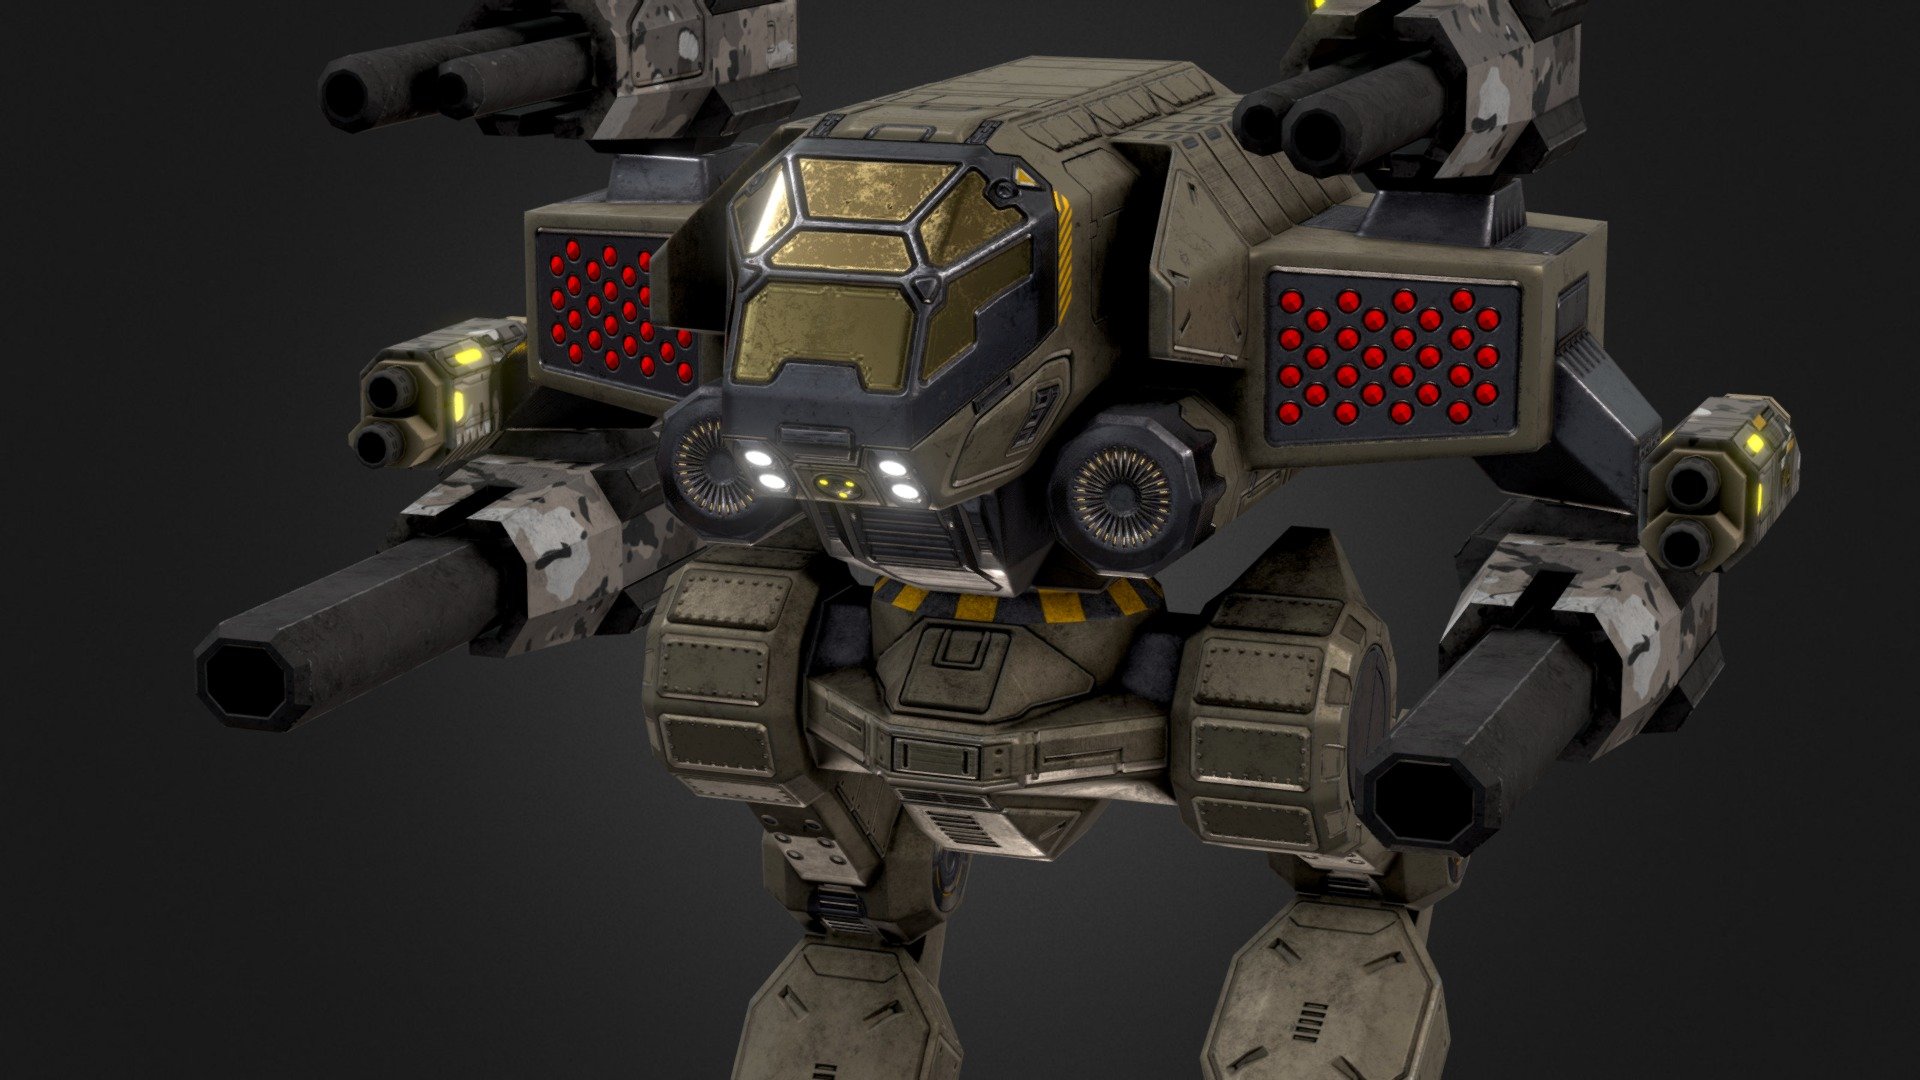 Spectre is one of my low-poly mech models designed for mobile game. It contains 4 moduler rifles and 2 lasers with high resolution diffusemap, normalmap,roughnessmap, emissivemap,metallicmap and specularmaps. Model is rigged and has walking animation embedded. Upon the request different animations can be added 3d model